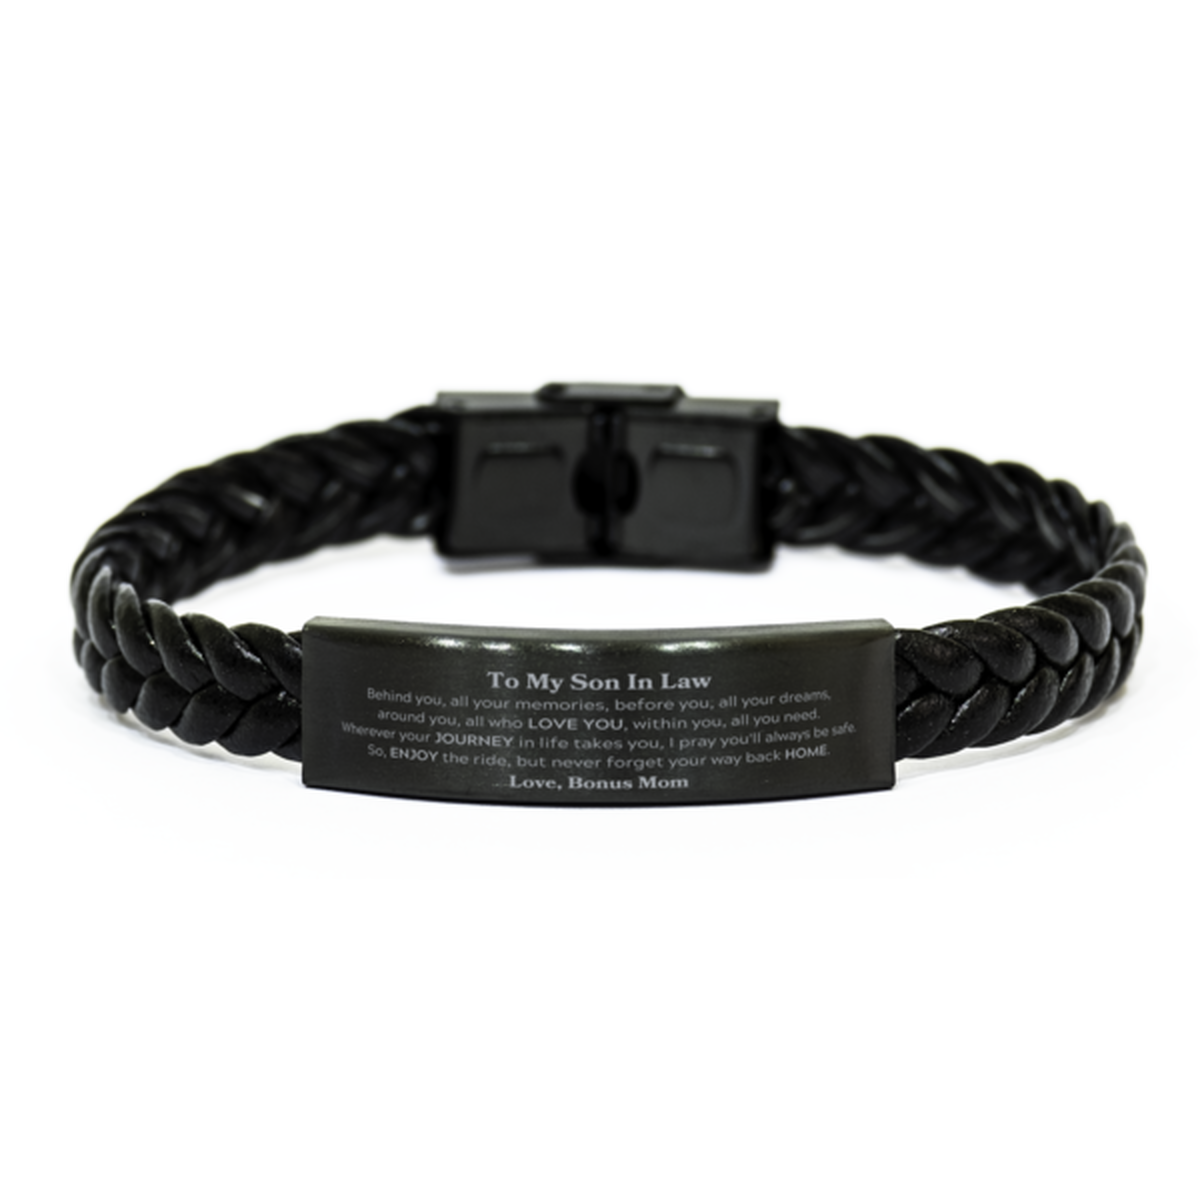 To My Son In Law Graduation Gifts from Bonus Mom, Son In Law Braided Leather Bracelet Christmas Birthday Gifts for Son In Law Behind you, all your memories, before you, all your dreams. Love, Bonus Mom